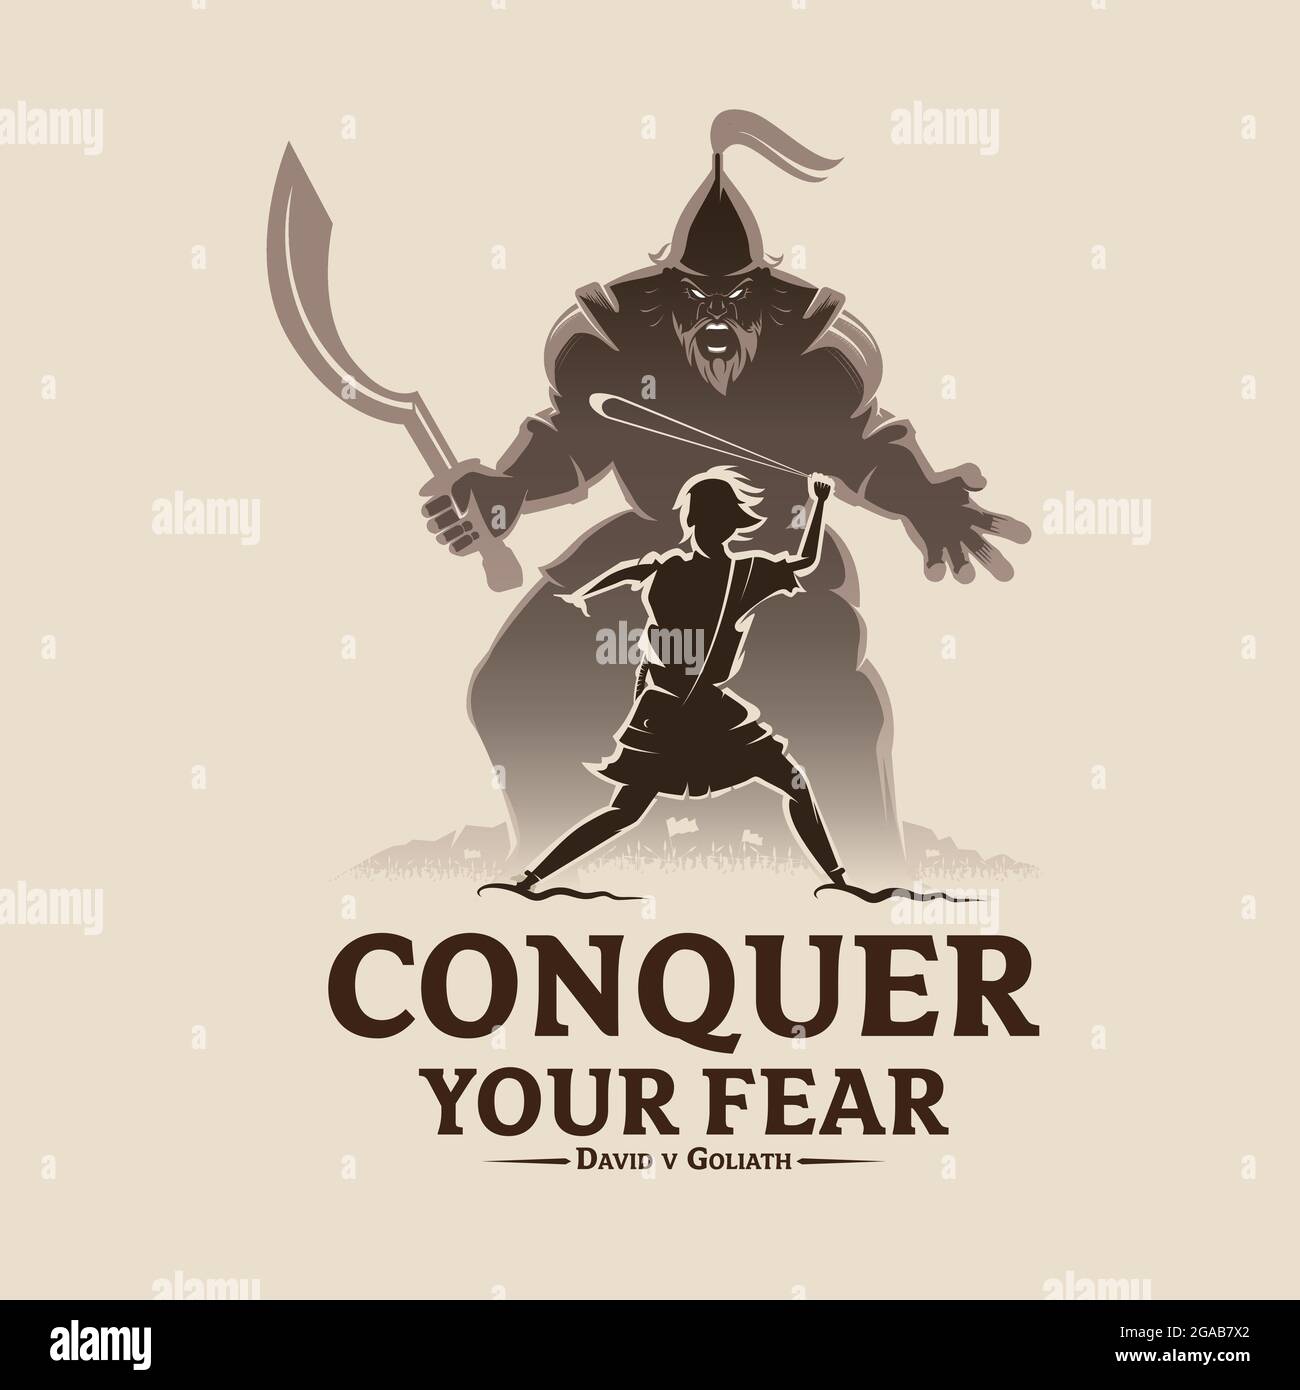 Conquer your fear David and Goliath vector illustration for t-shirt design, poster, banner or any other purpose. Stock Vector